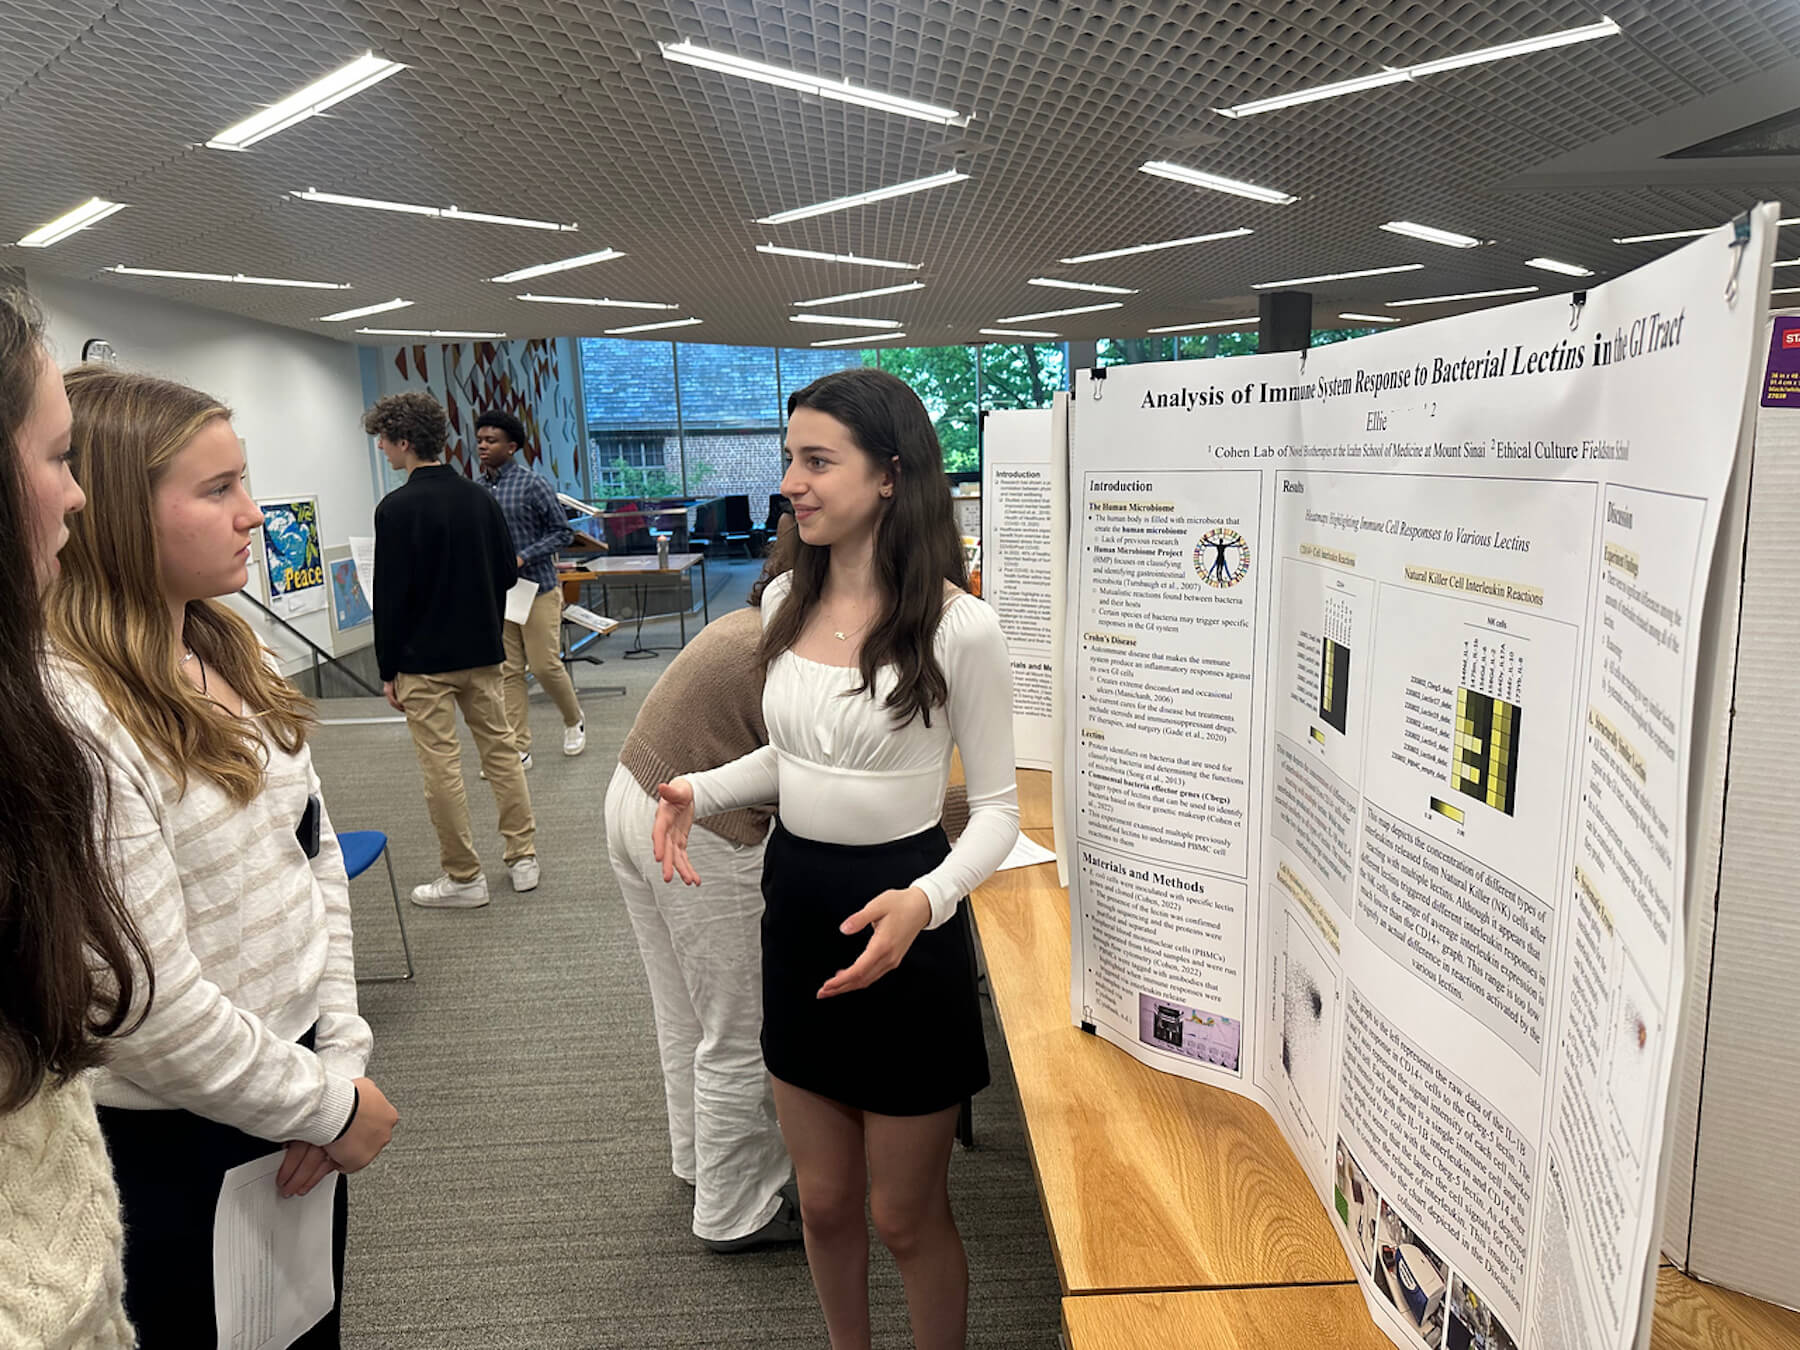 An Ethical Culture Fieldston School student speaks at science research event.